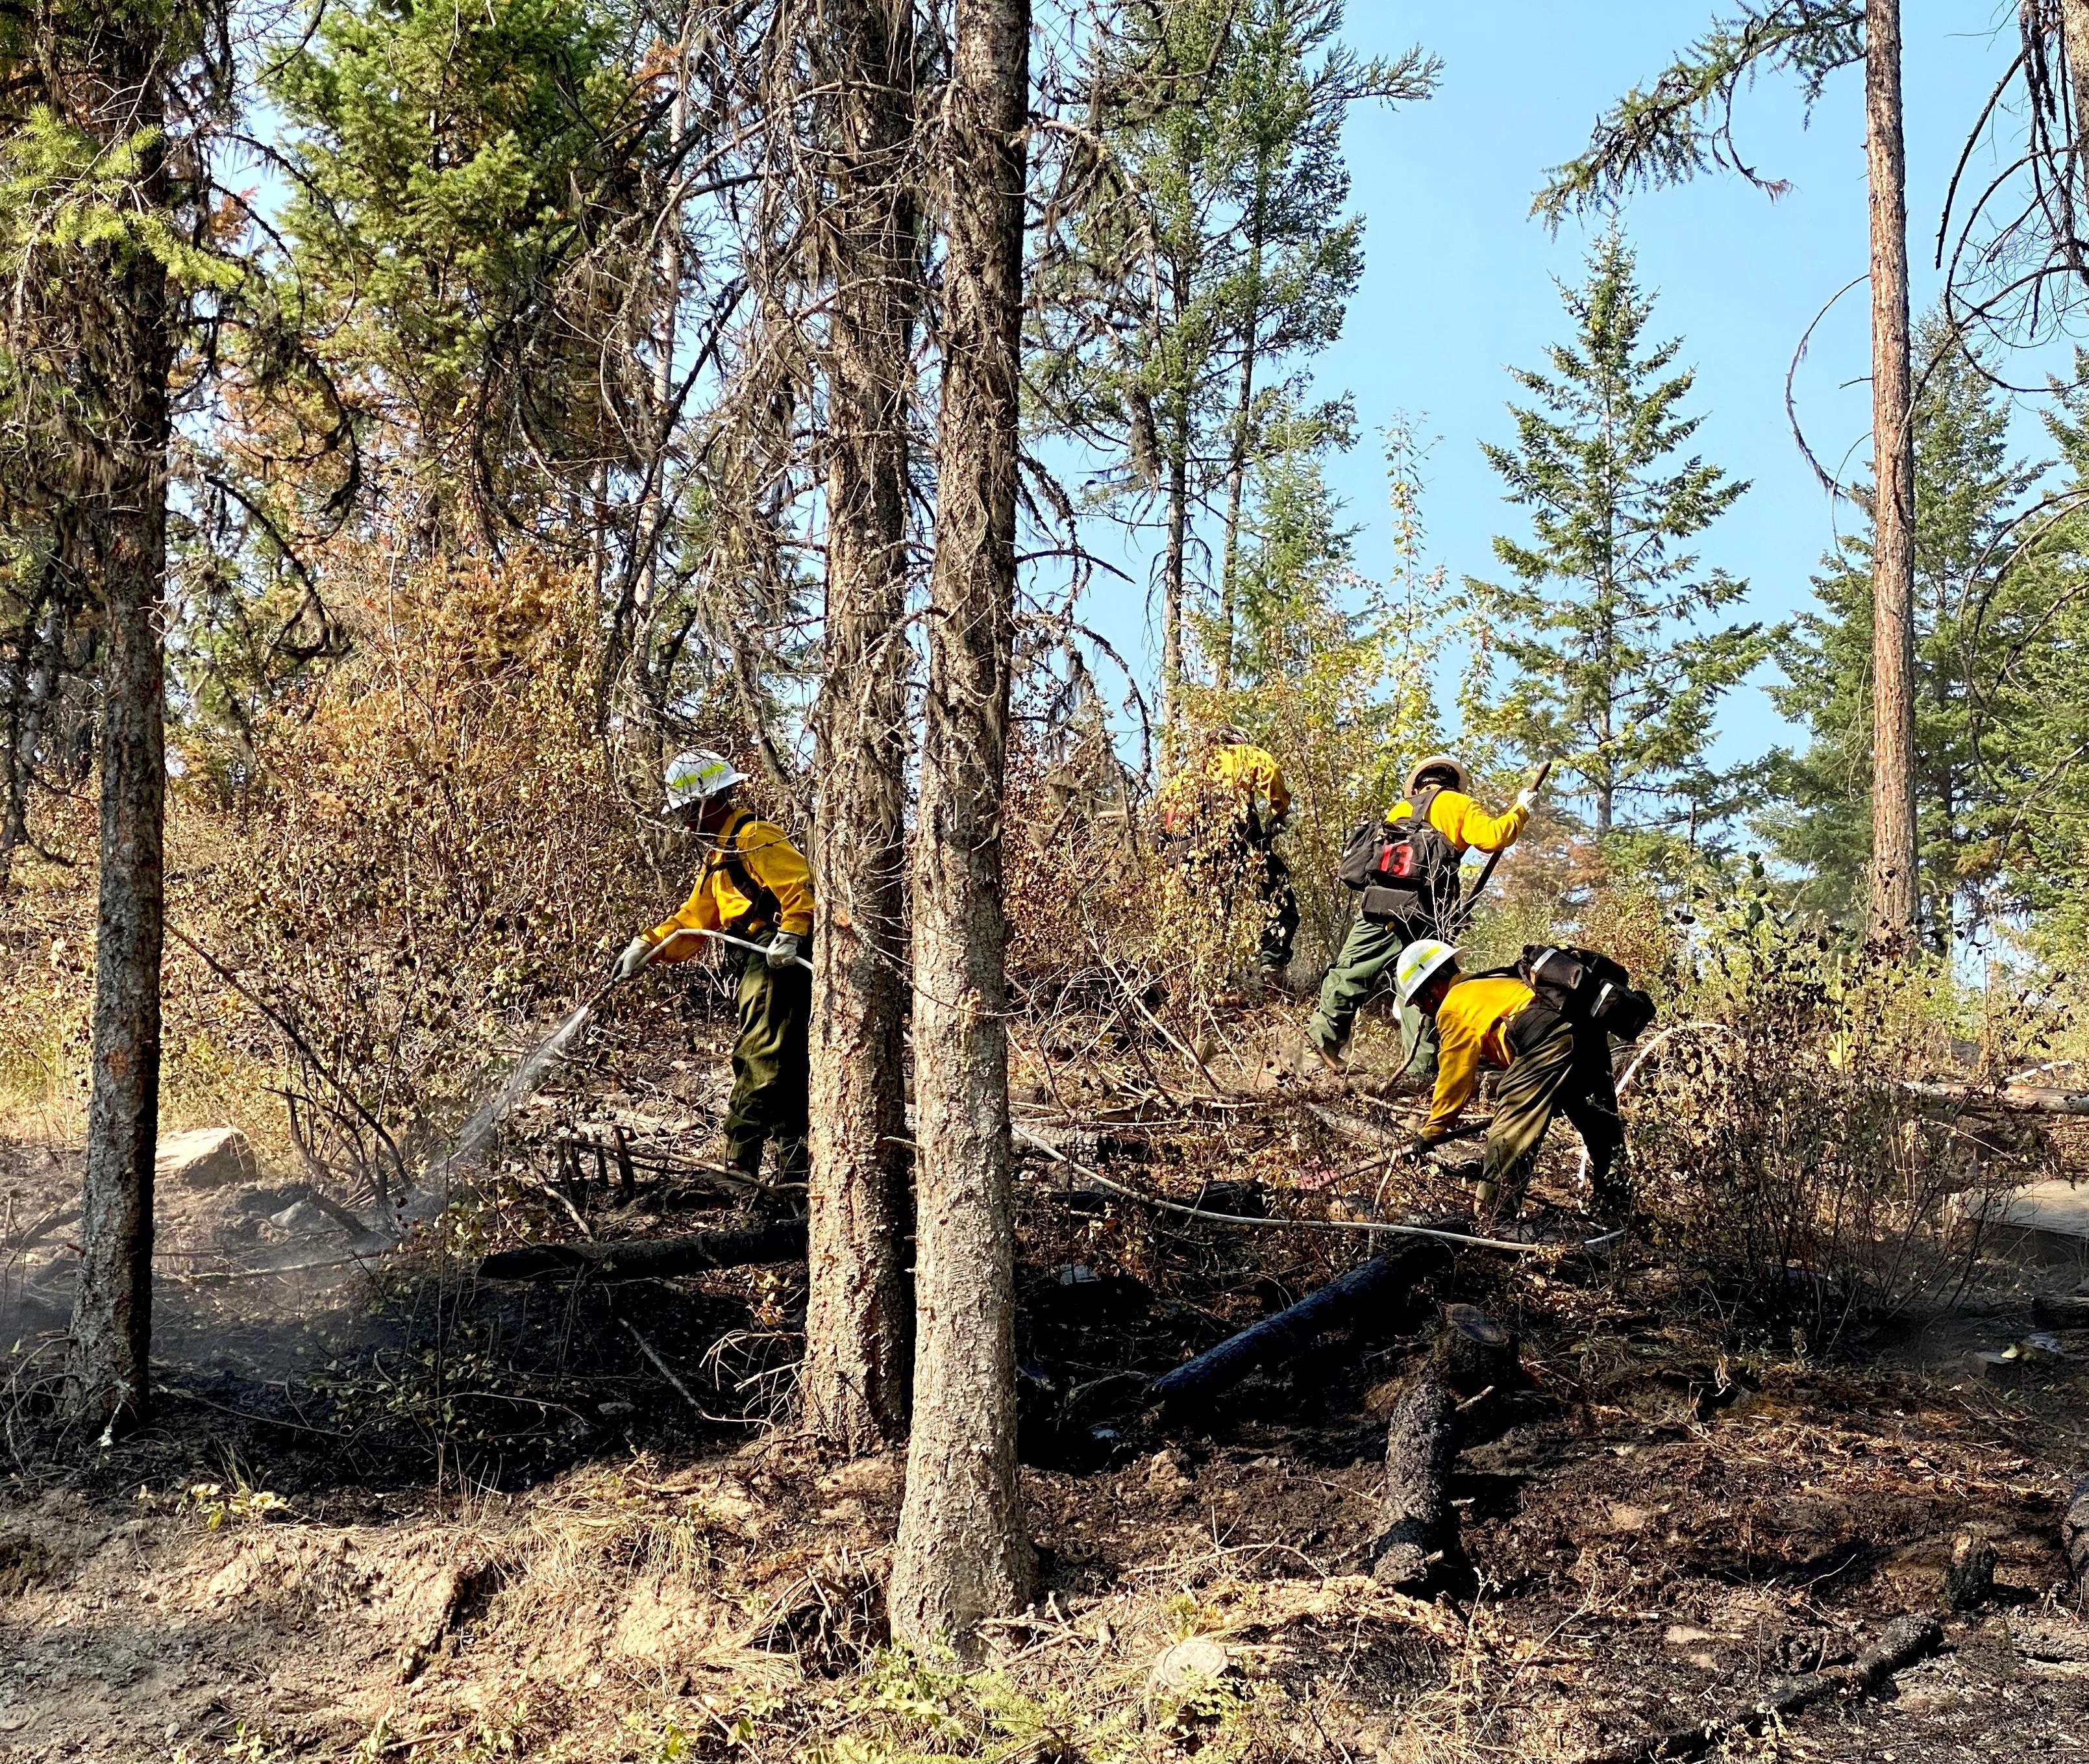 West Coast Reforestation Crew extinguishing areas of heat along the road on the south shore of Lake Mary Ronan, August 7, 2022.